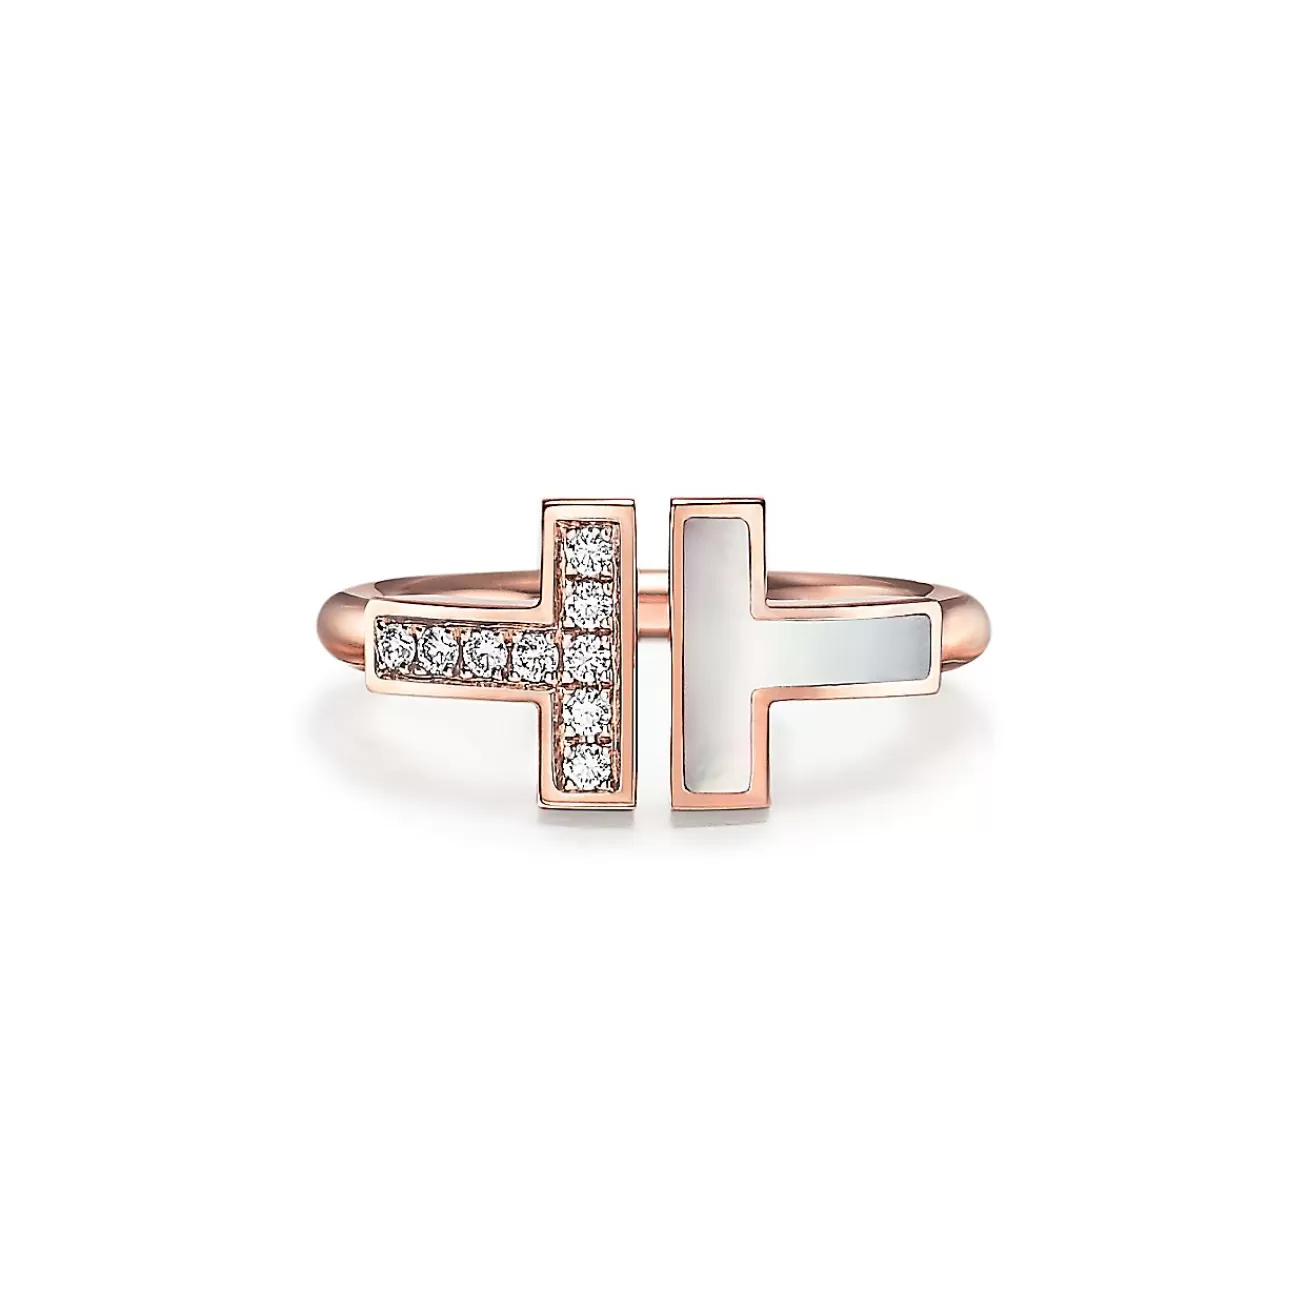 Tiffany & Co. Tiffany T Wire Ring in Rose Gold with Diamonds and Mother-of-pearl | ^ Rings | Rose Gold Jewelry